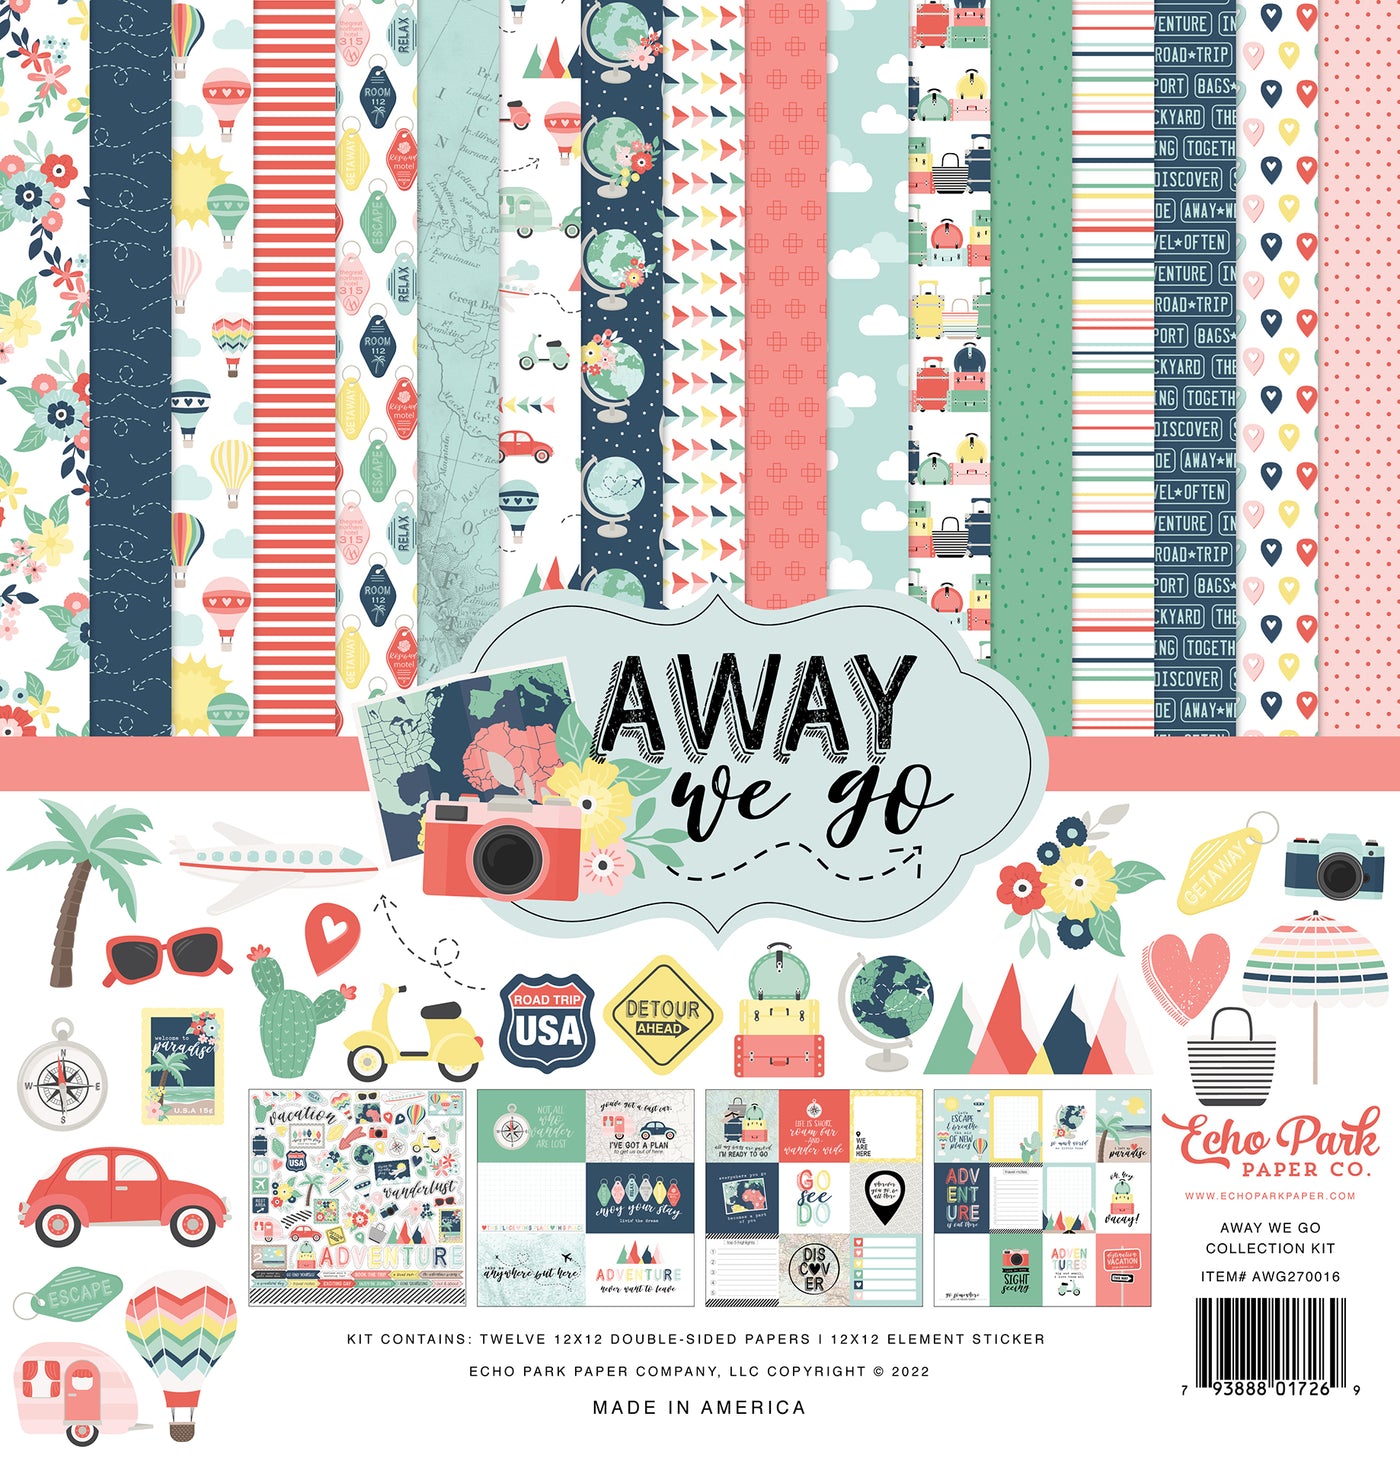 Twelve double-sided papers with travel and vacation themes. 12x12 inch textured cardstock. Includes Element Sticker Sheet, Echo Park Paper Co.